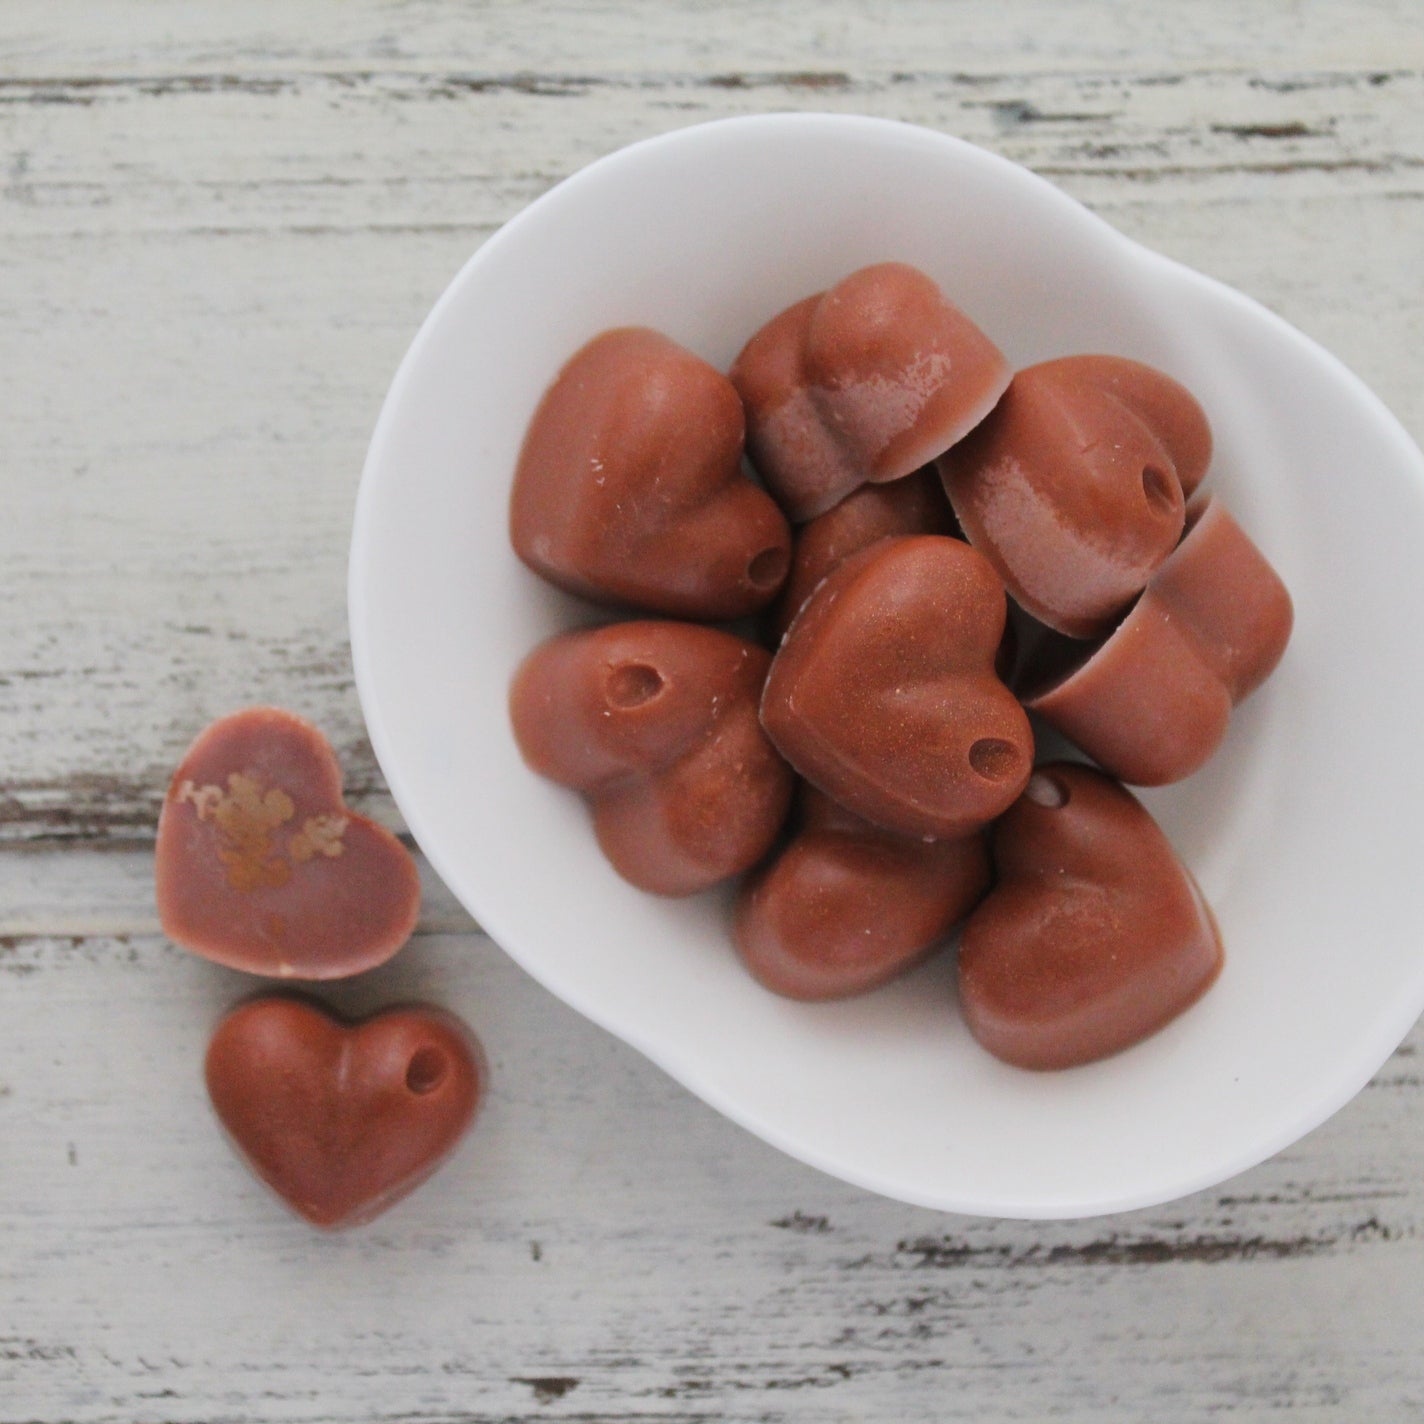 Heart shaped chocolate themed bath melts in white dish